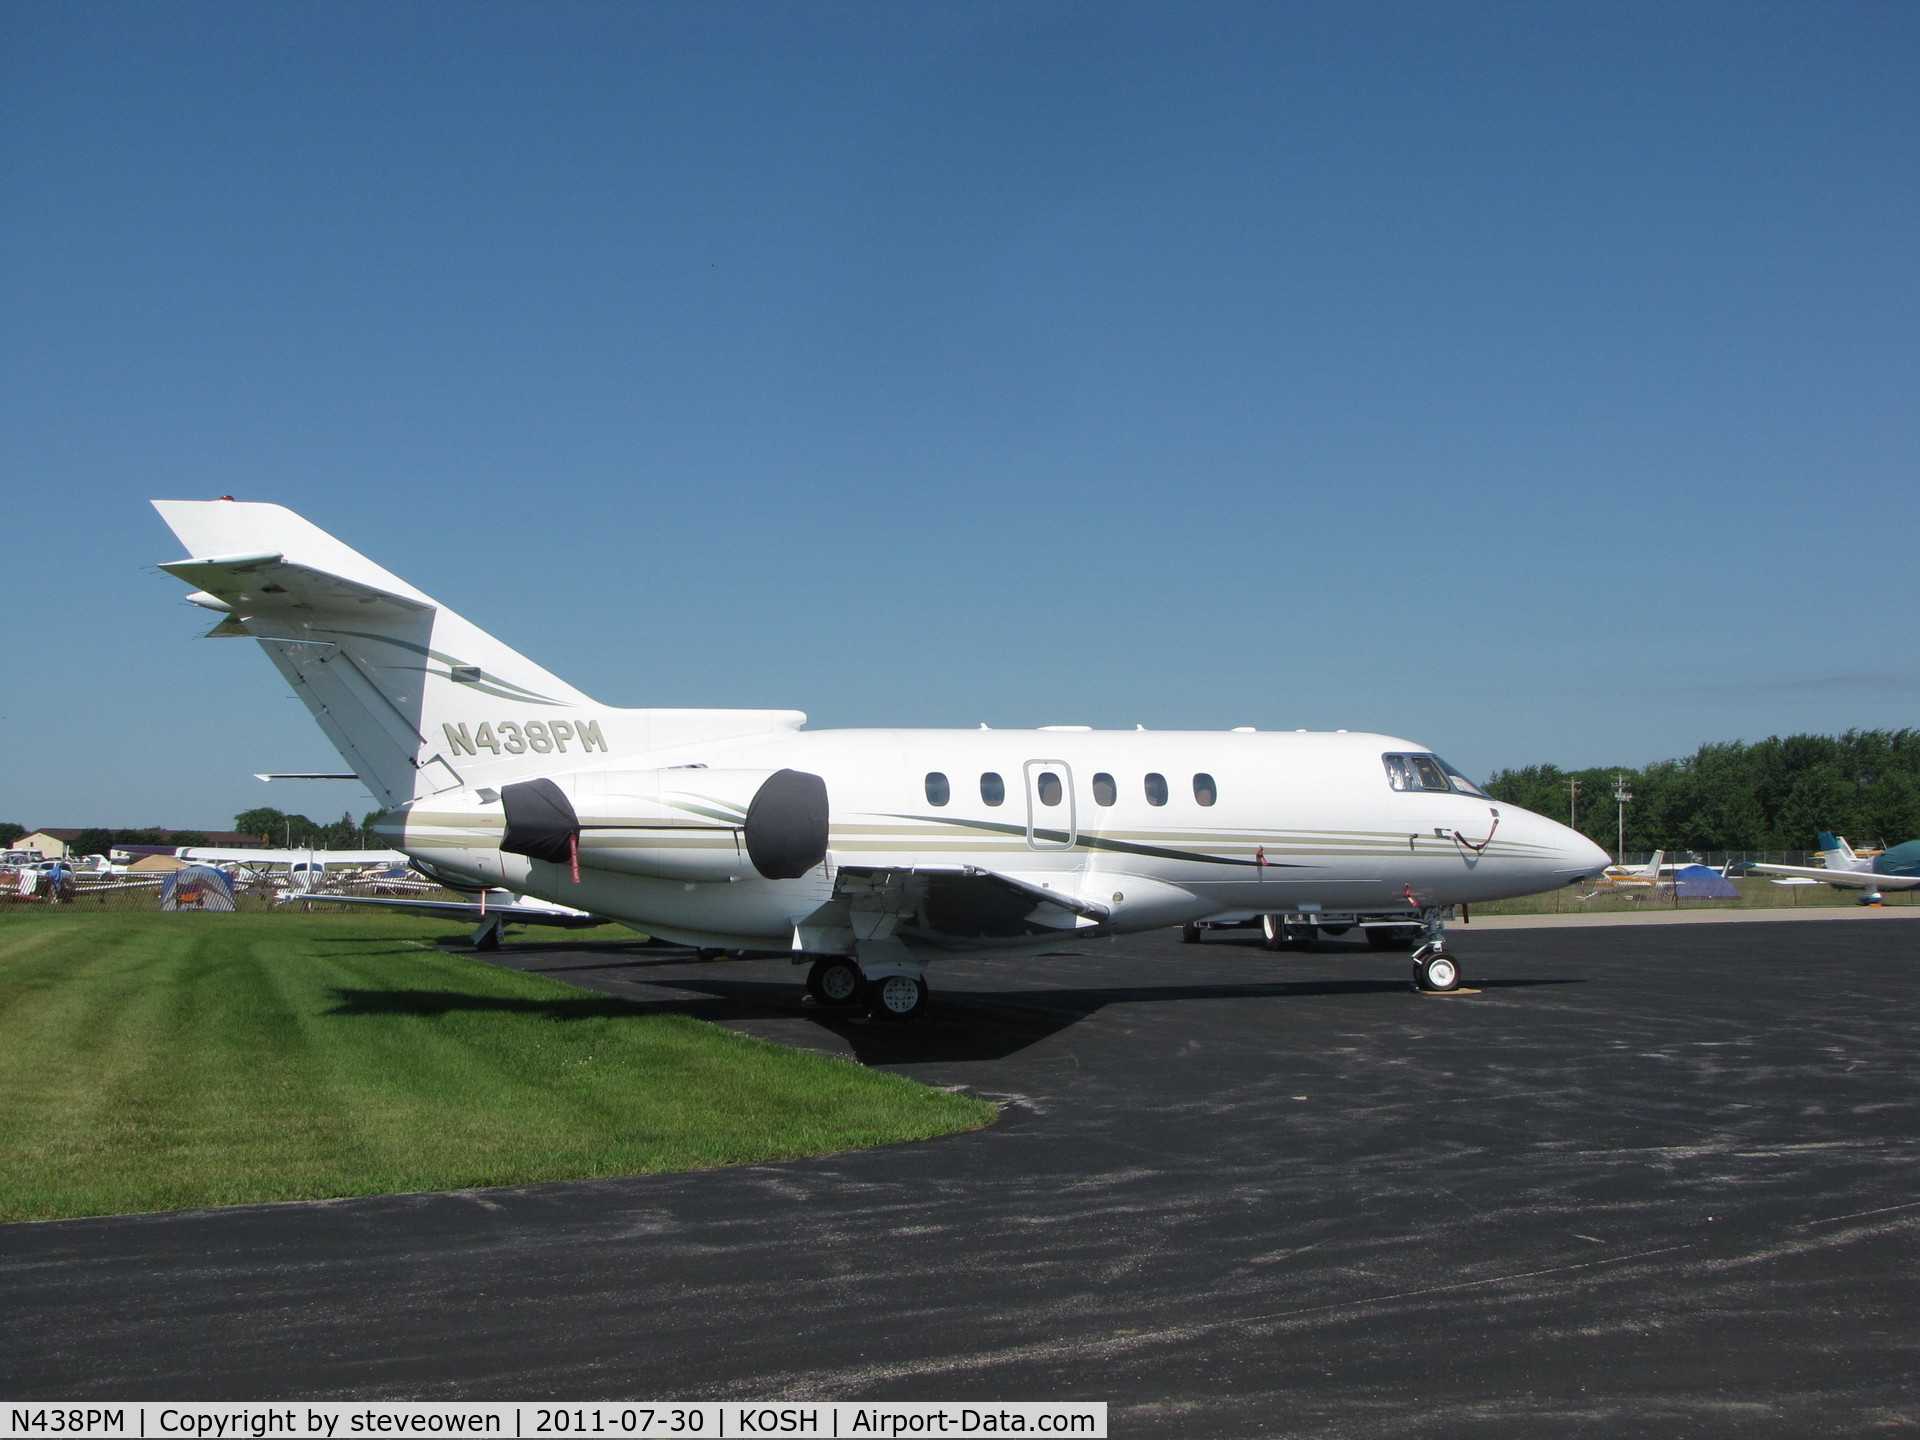 N438PM, 2003 Raytheon Hawker 800XP C/N 258636, parked at the 